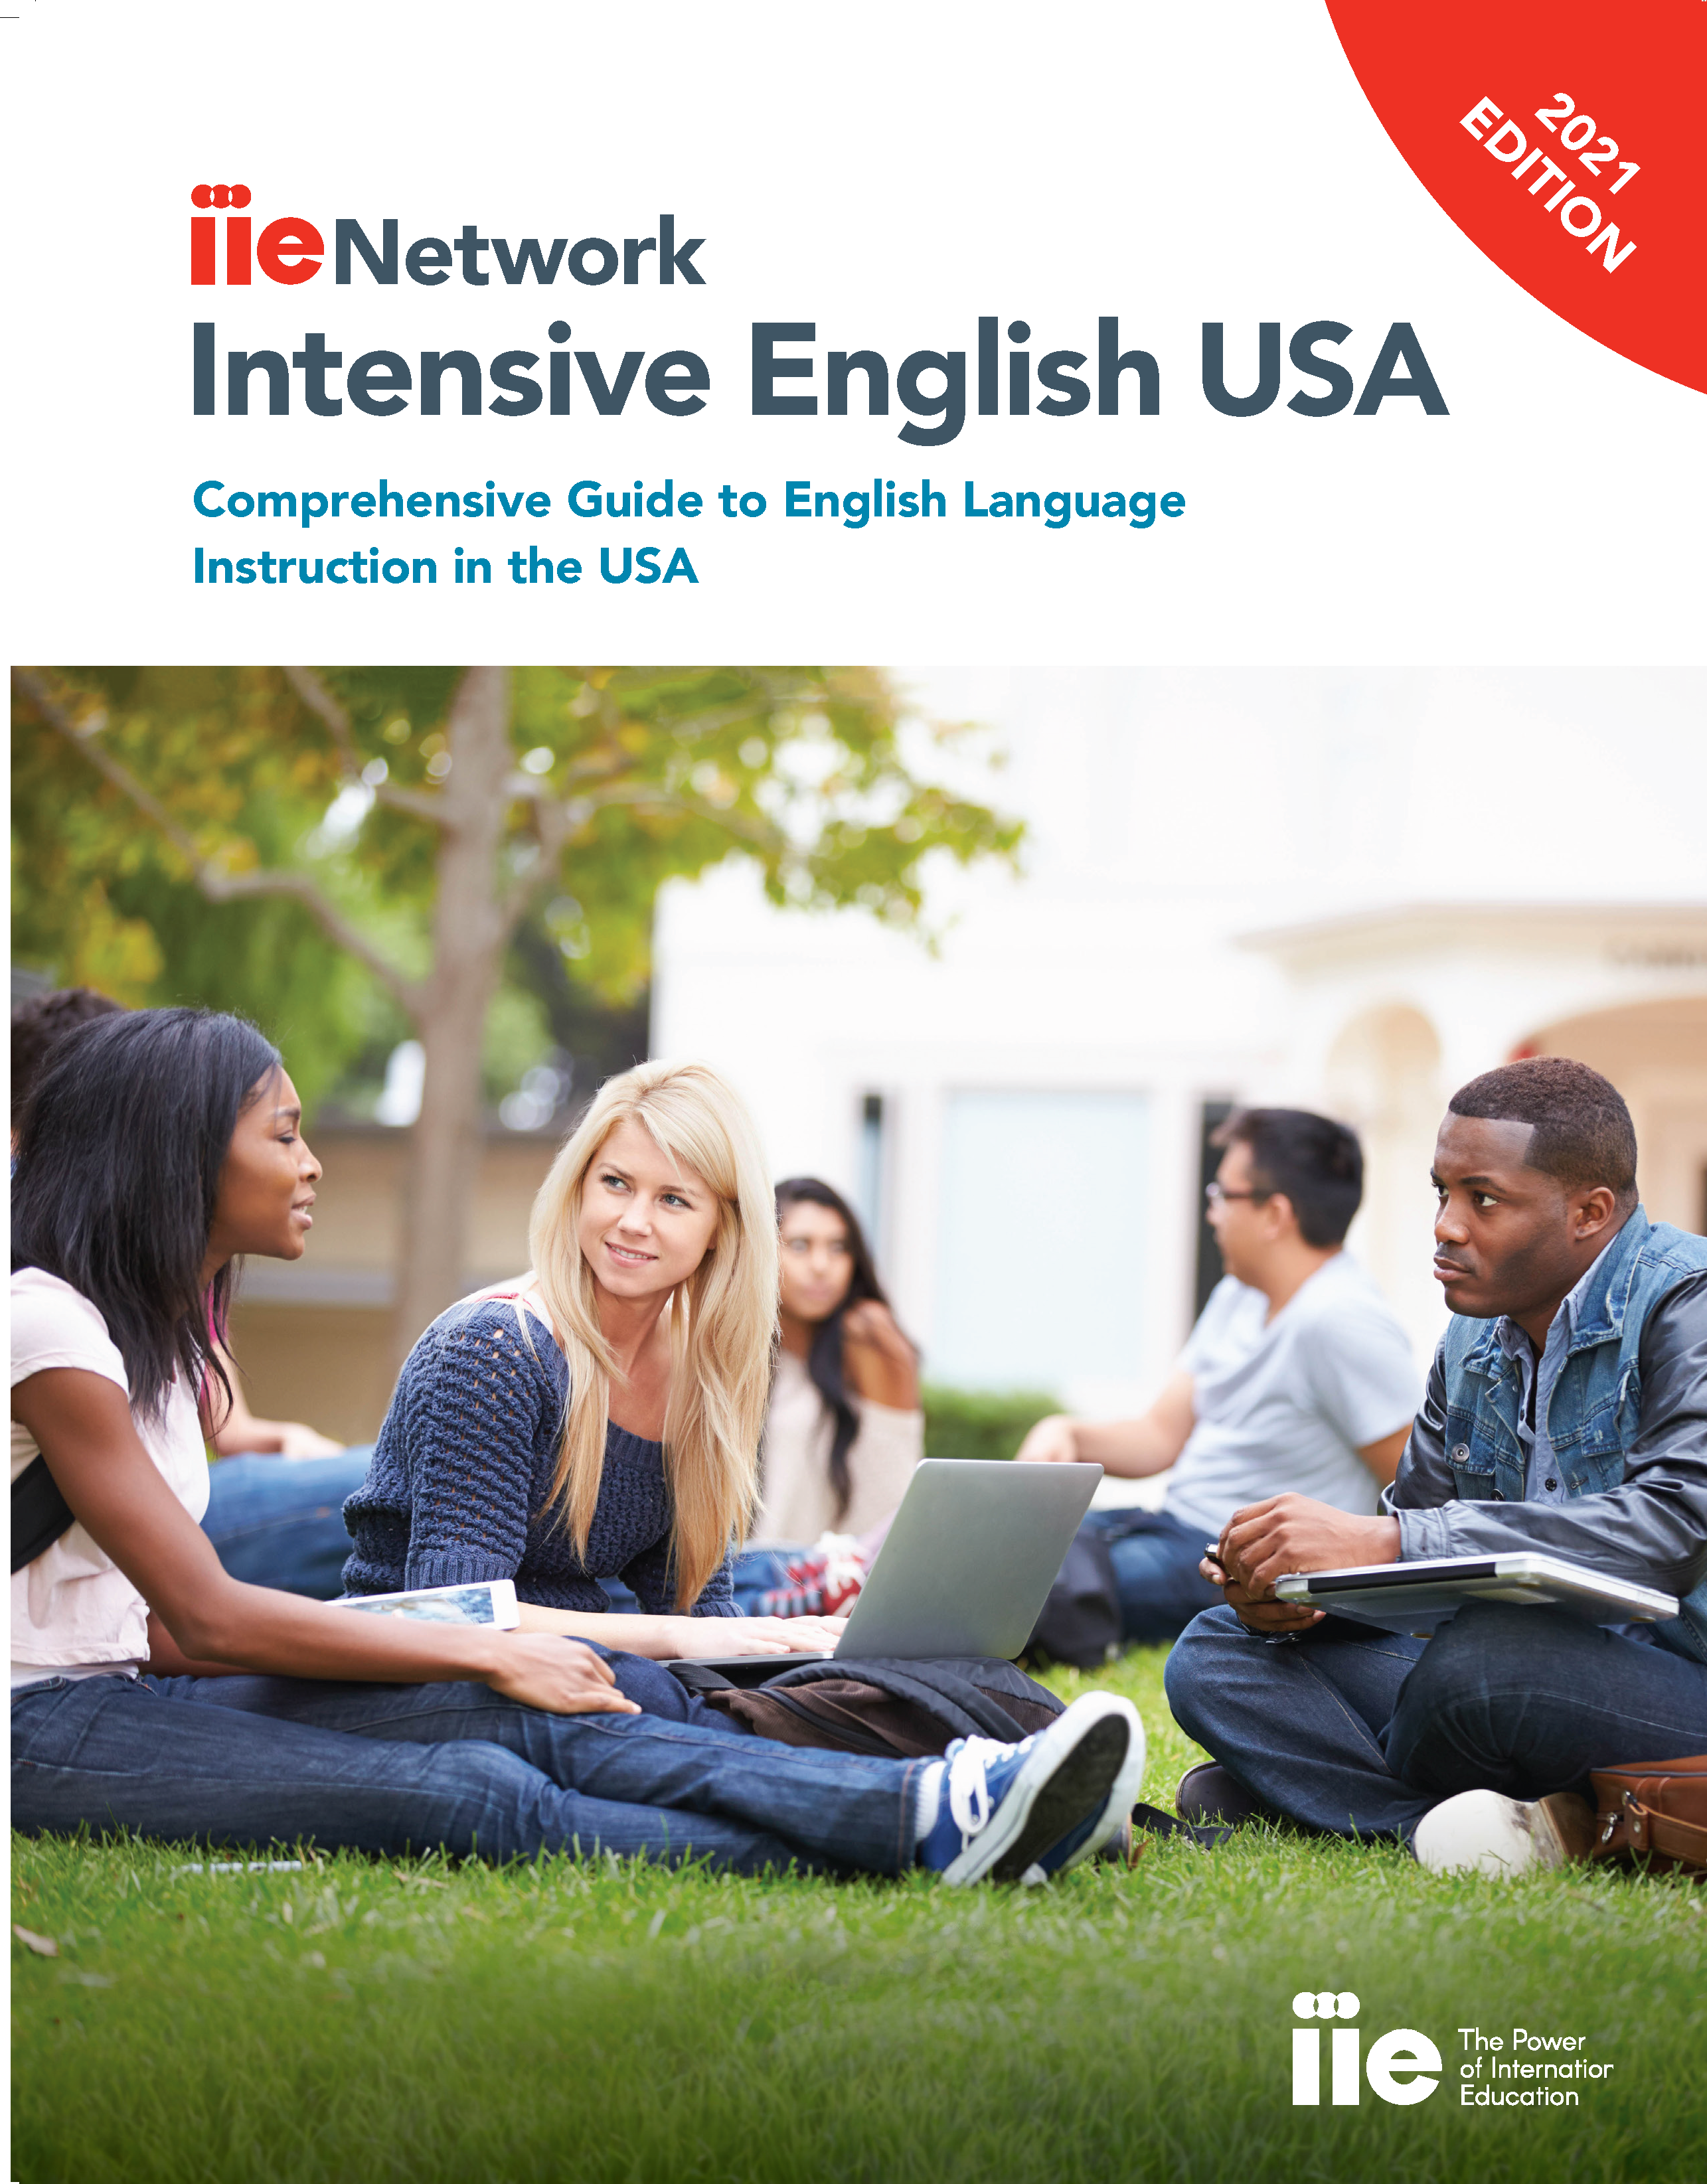 Cover of Intensive English 2021 edition, image of student sitting on grass and talking